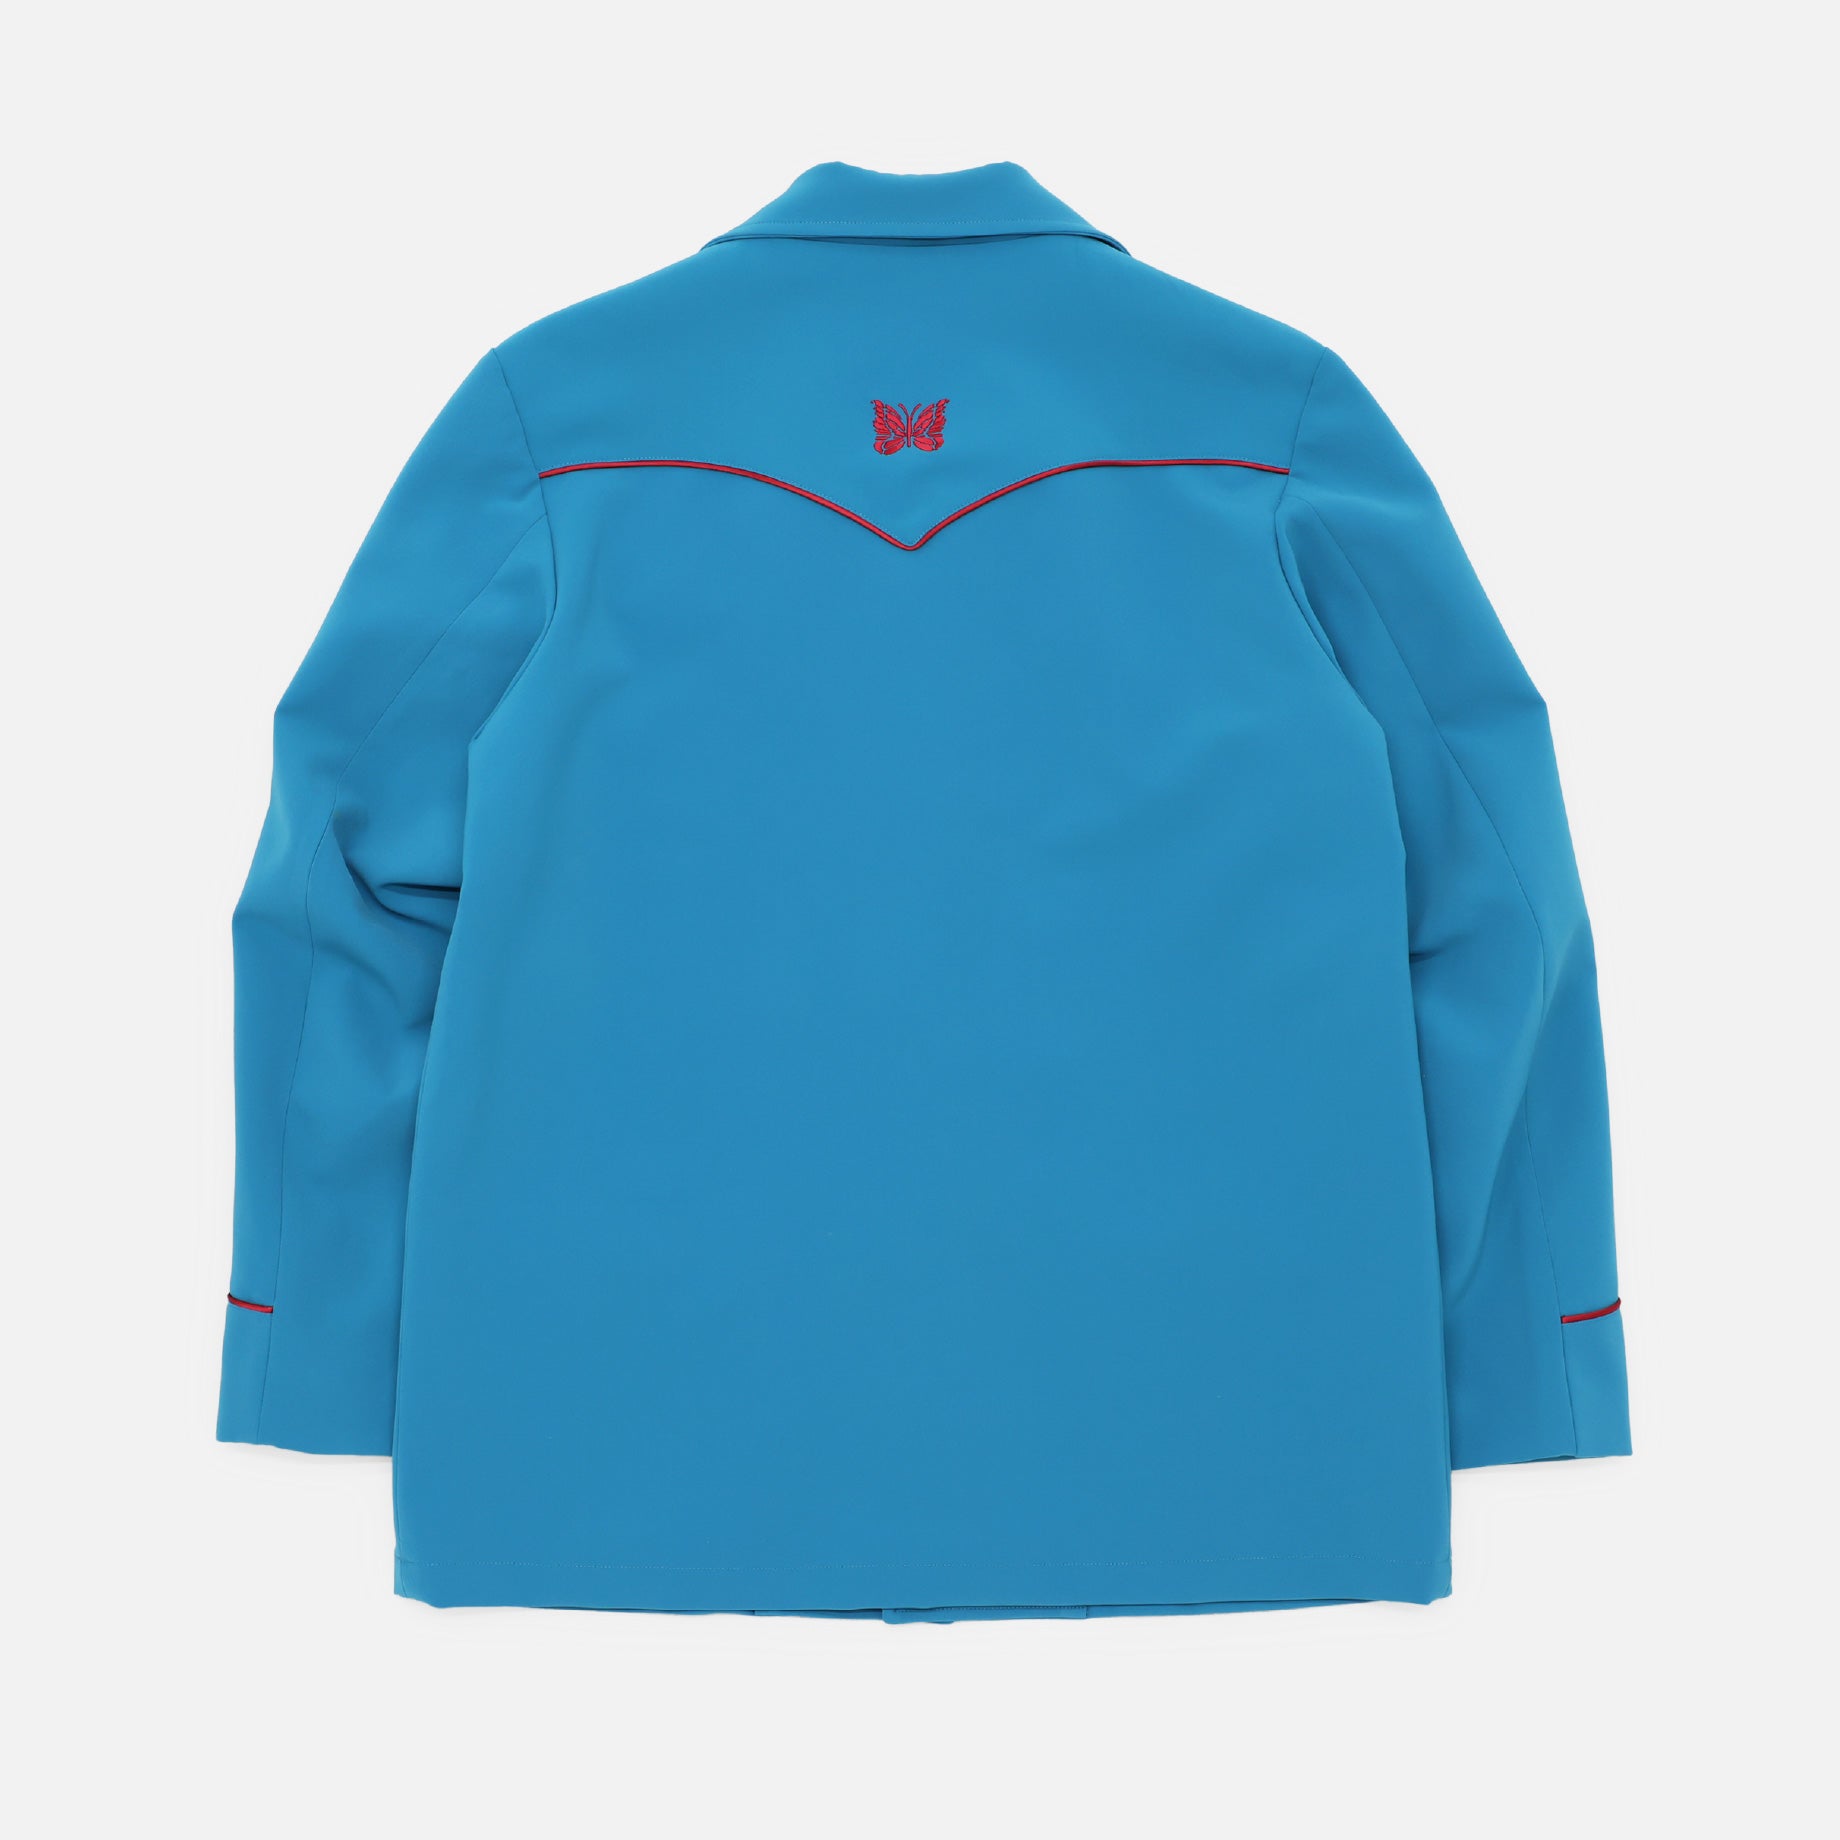 WESTERN LEISURE JKT - DOUBLE CLOTH（TURQUOISE）